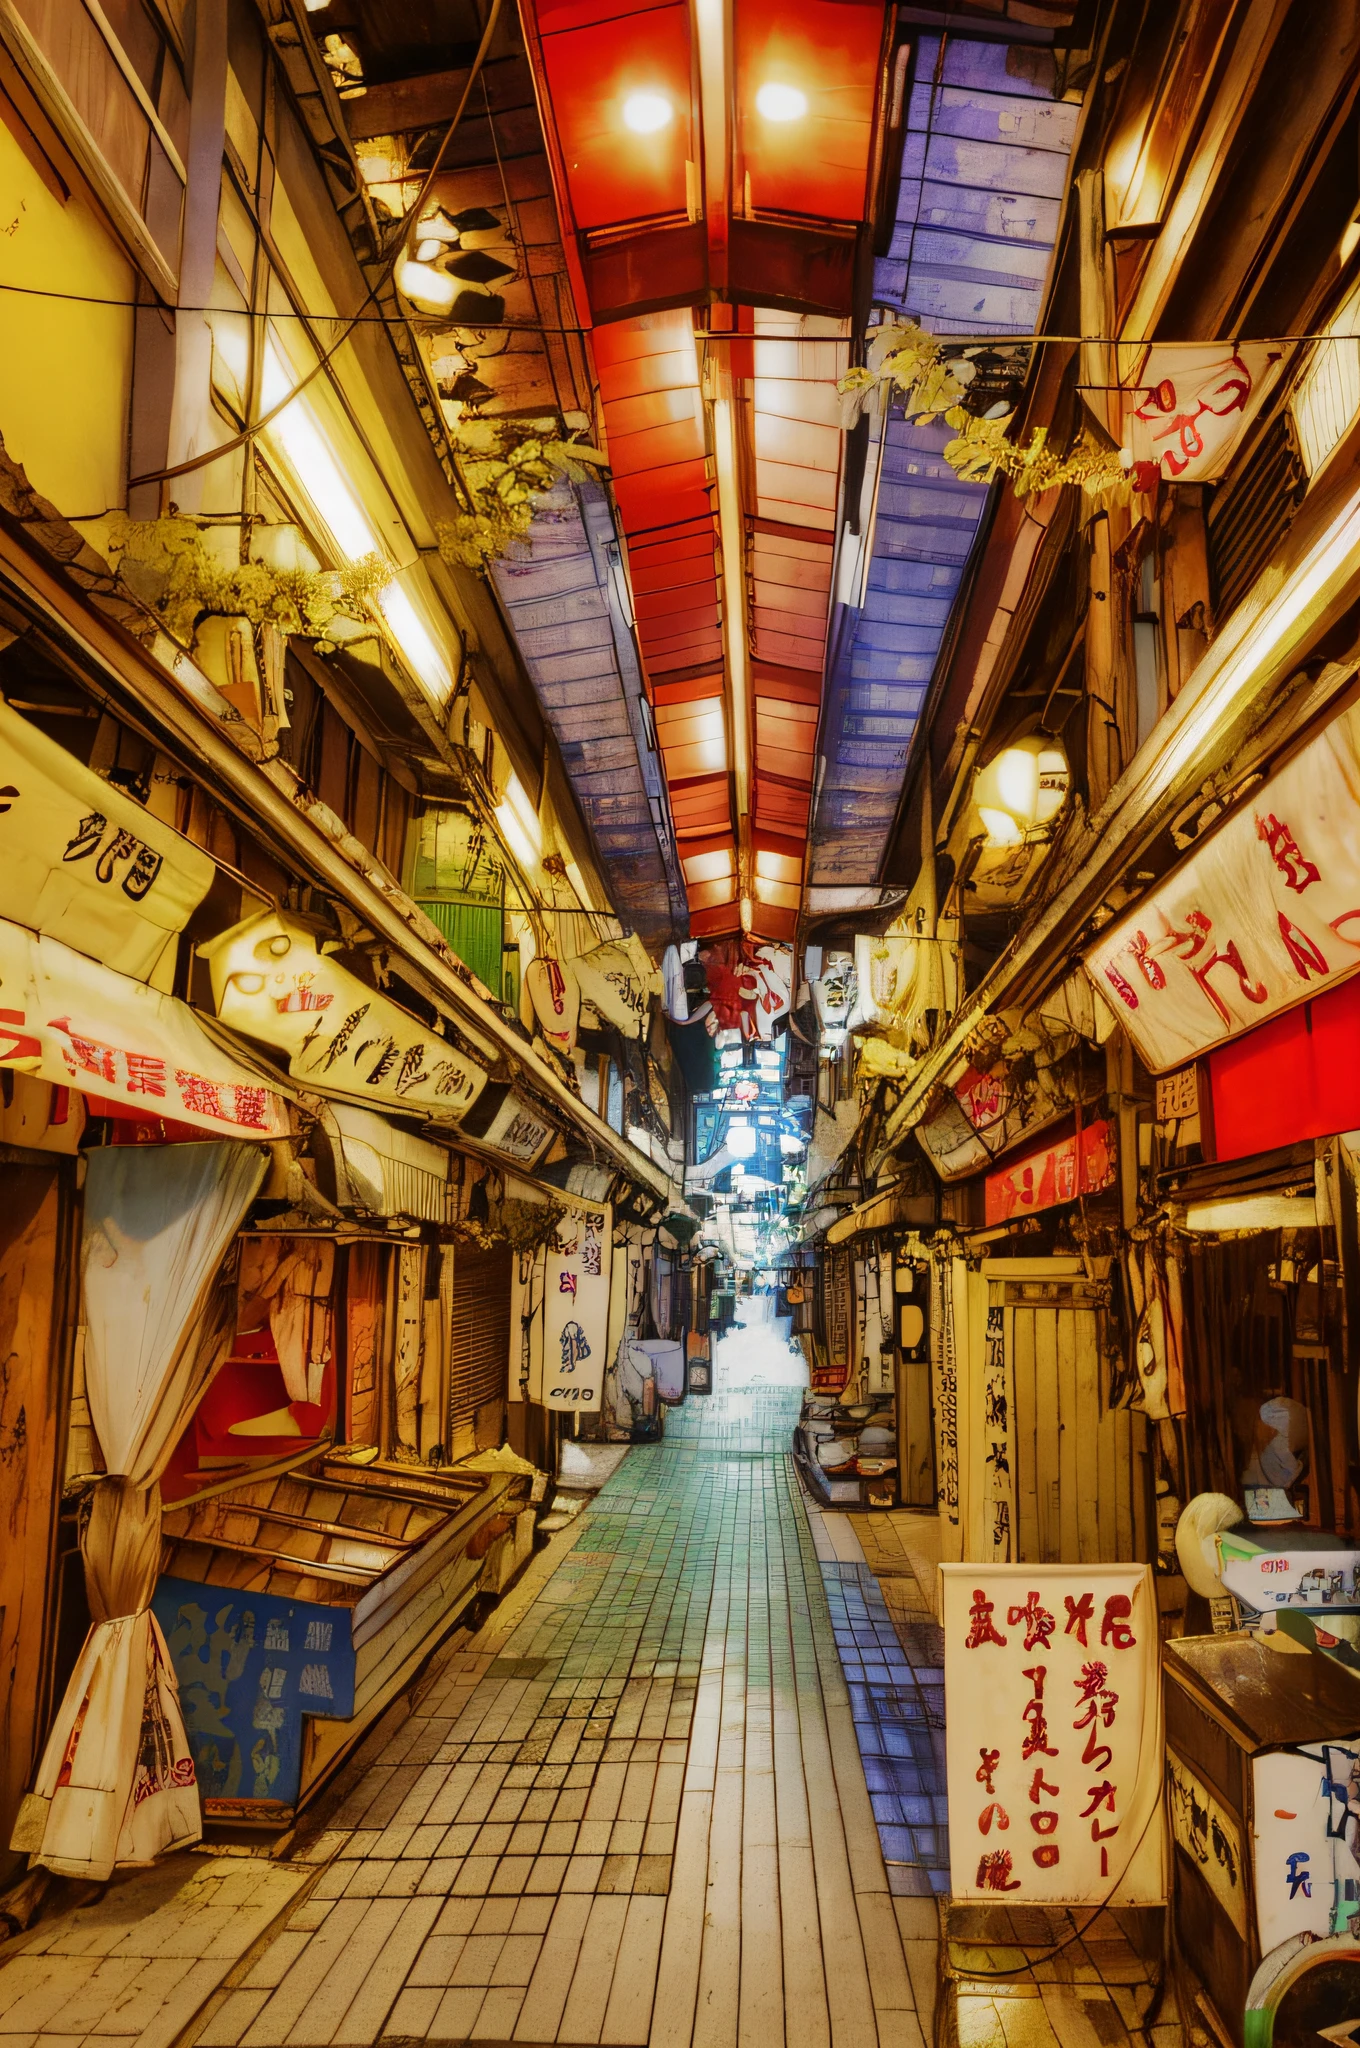 there are many signs hanging from the ceiling in this 市場, old 日本の街路 市場, 市場 in japan, wet 市場 street, 市場, 廃墟となった新宿の廃墟, 廃墟となった新宿の廃墟 town, 沖縄 日本, 東京の路地, the vibrant echoes of the 市場, 日本の街路, 市場 setting, 日本のダウンタウン, fish 市場 stalls, sakimichan HDRI